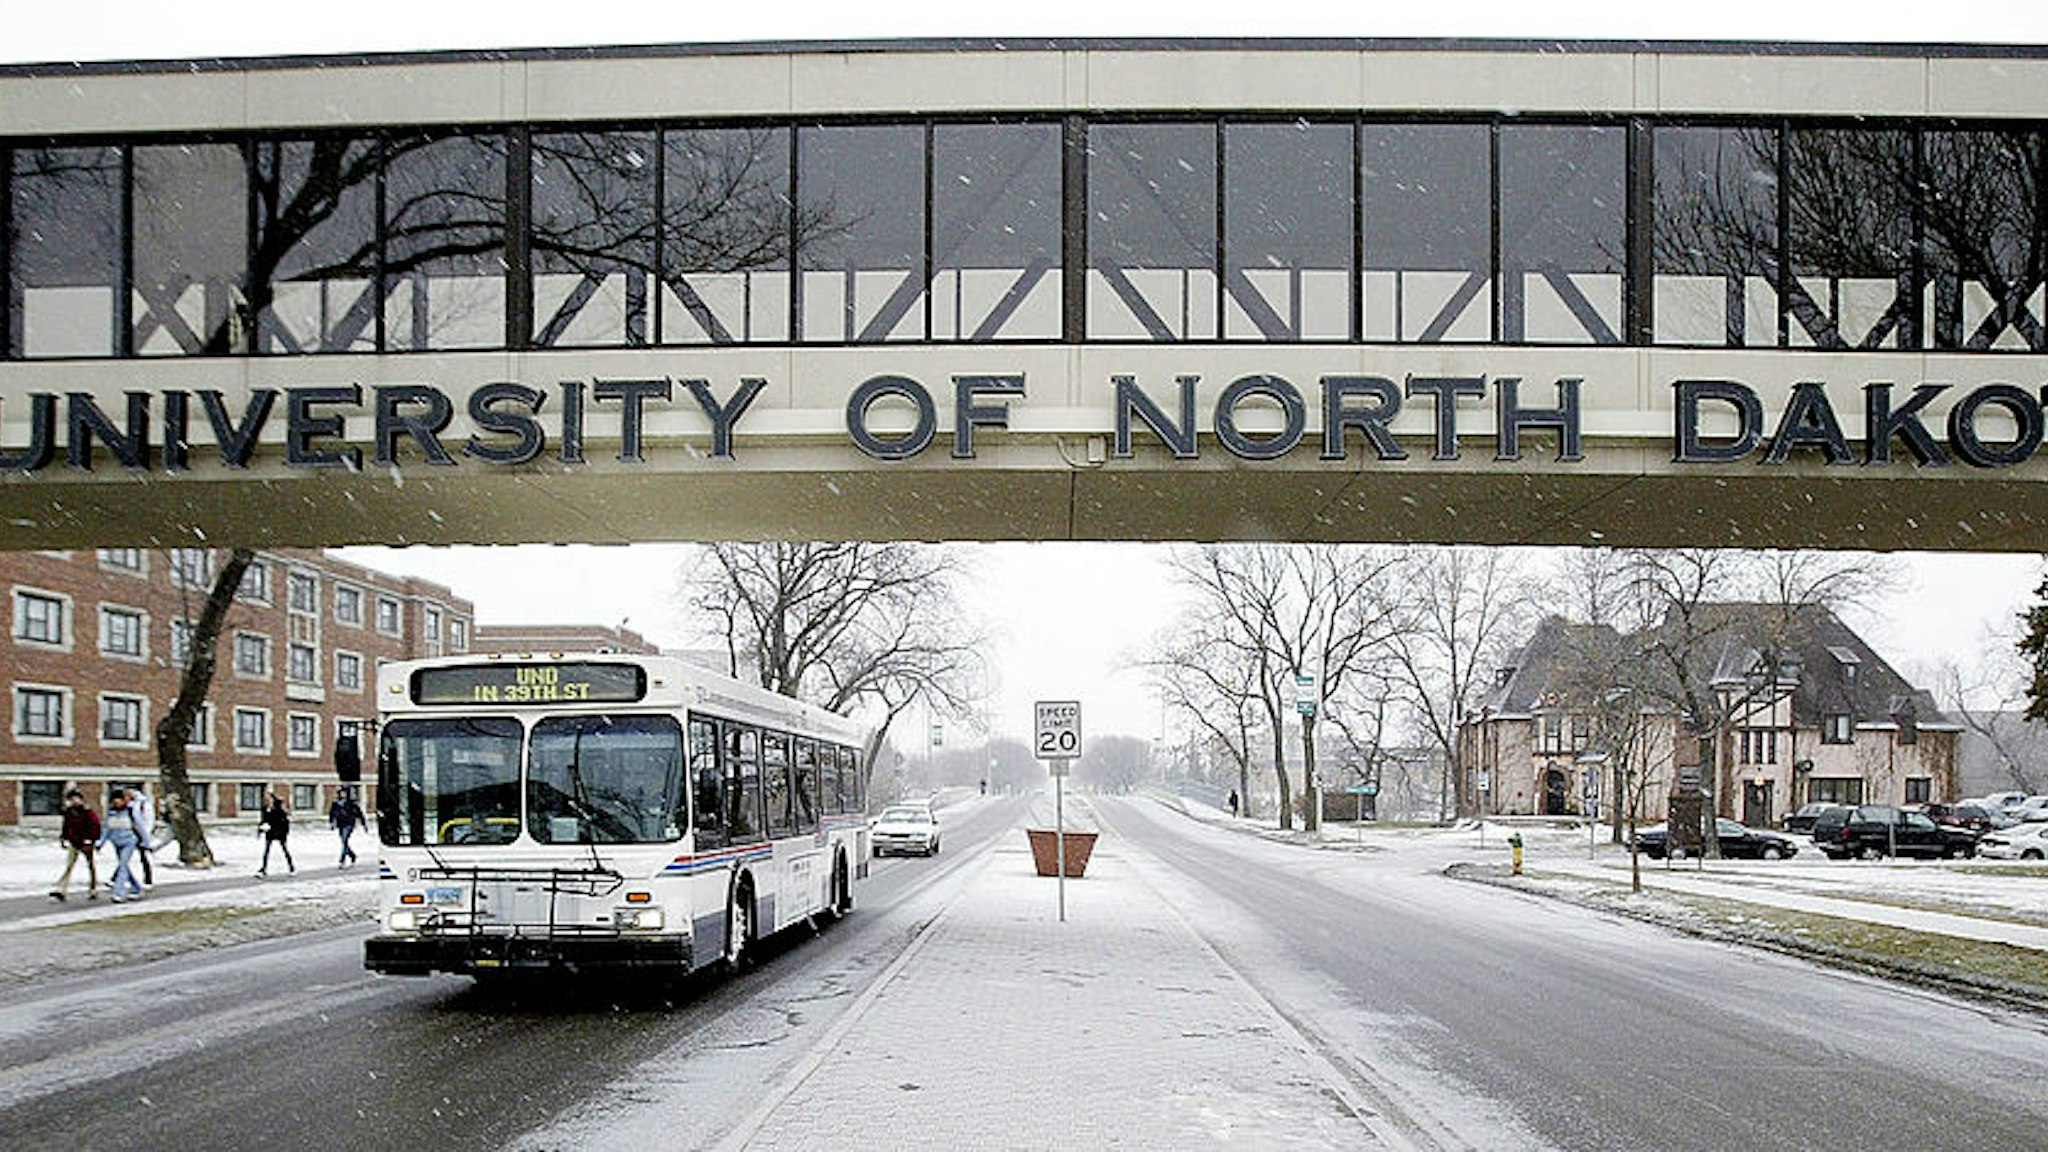 Students walk to class on the campus of the University of North Dakota December 4, 2003 in Grand Forks, North Dakota.